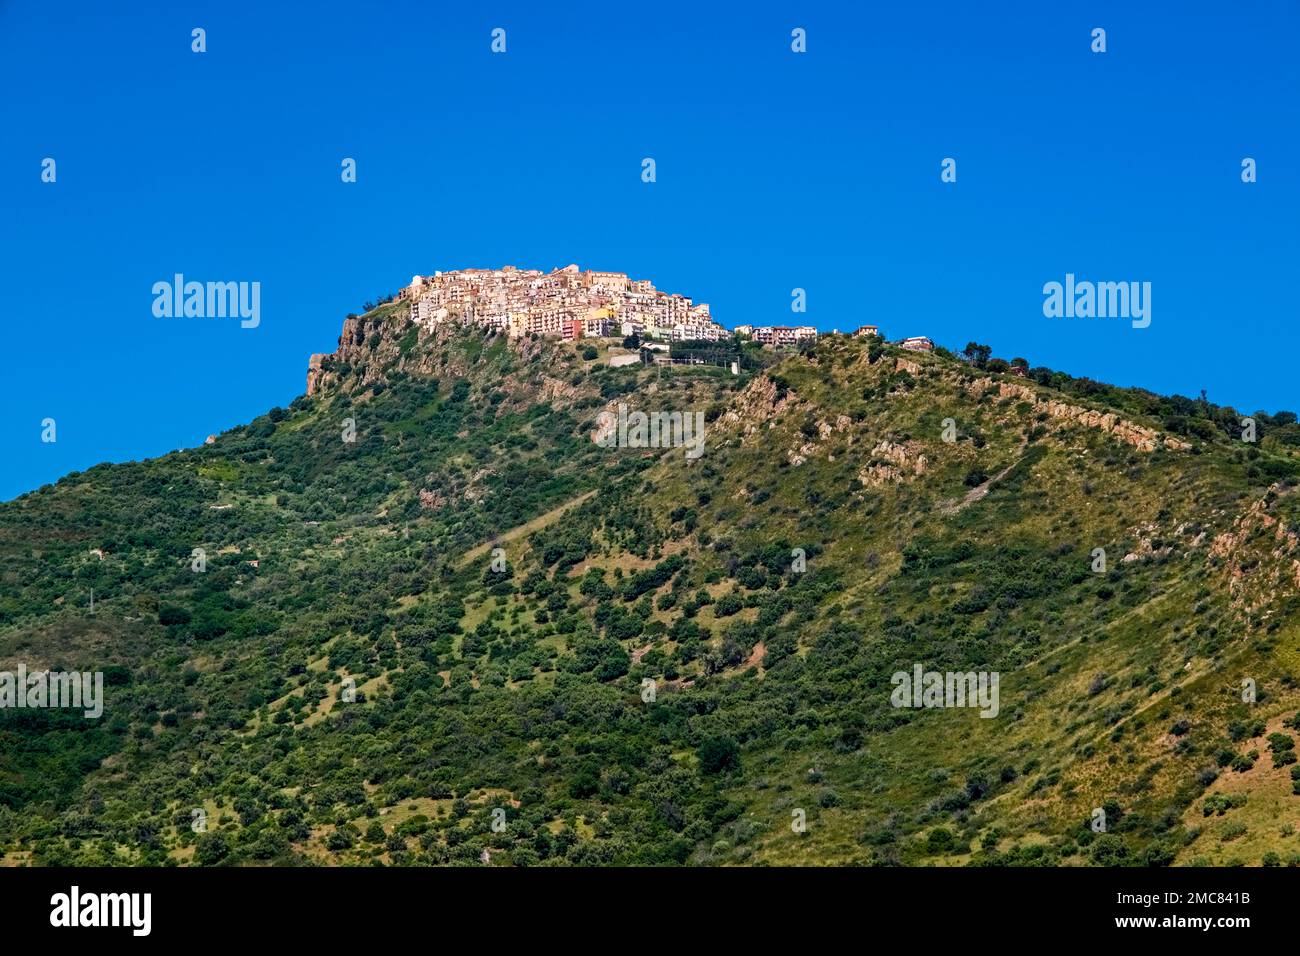 View on the houses of the small town of Pollina, located on a hill. Stock Photo